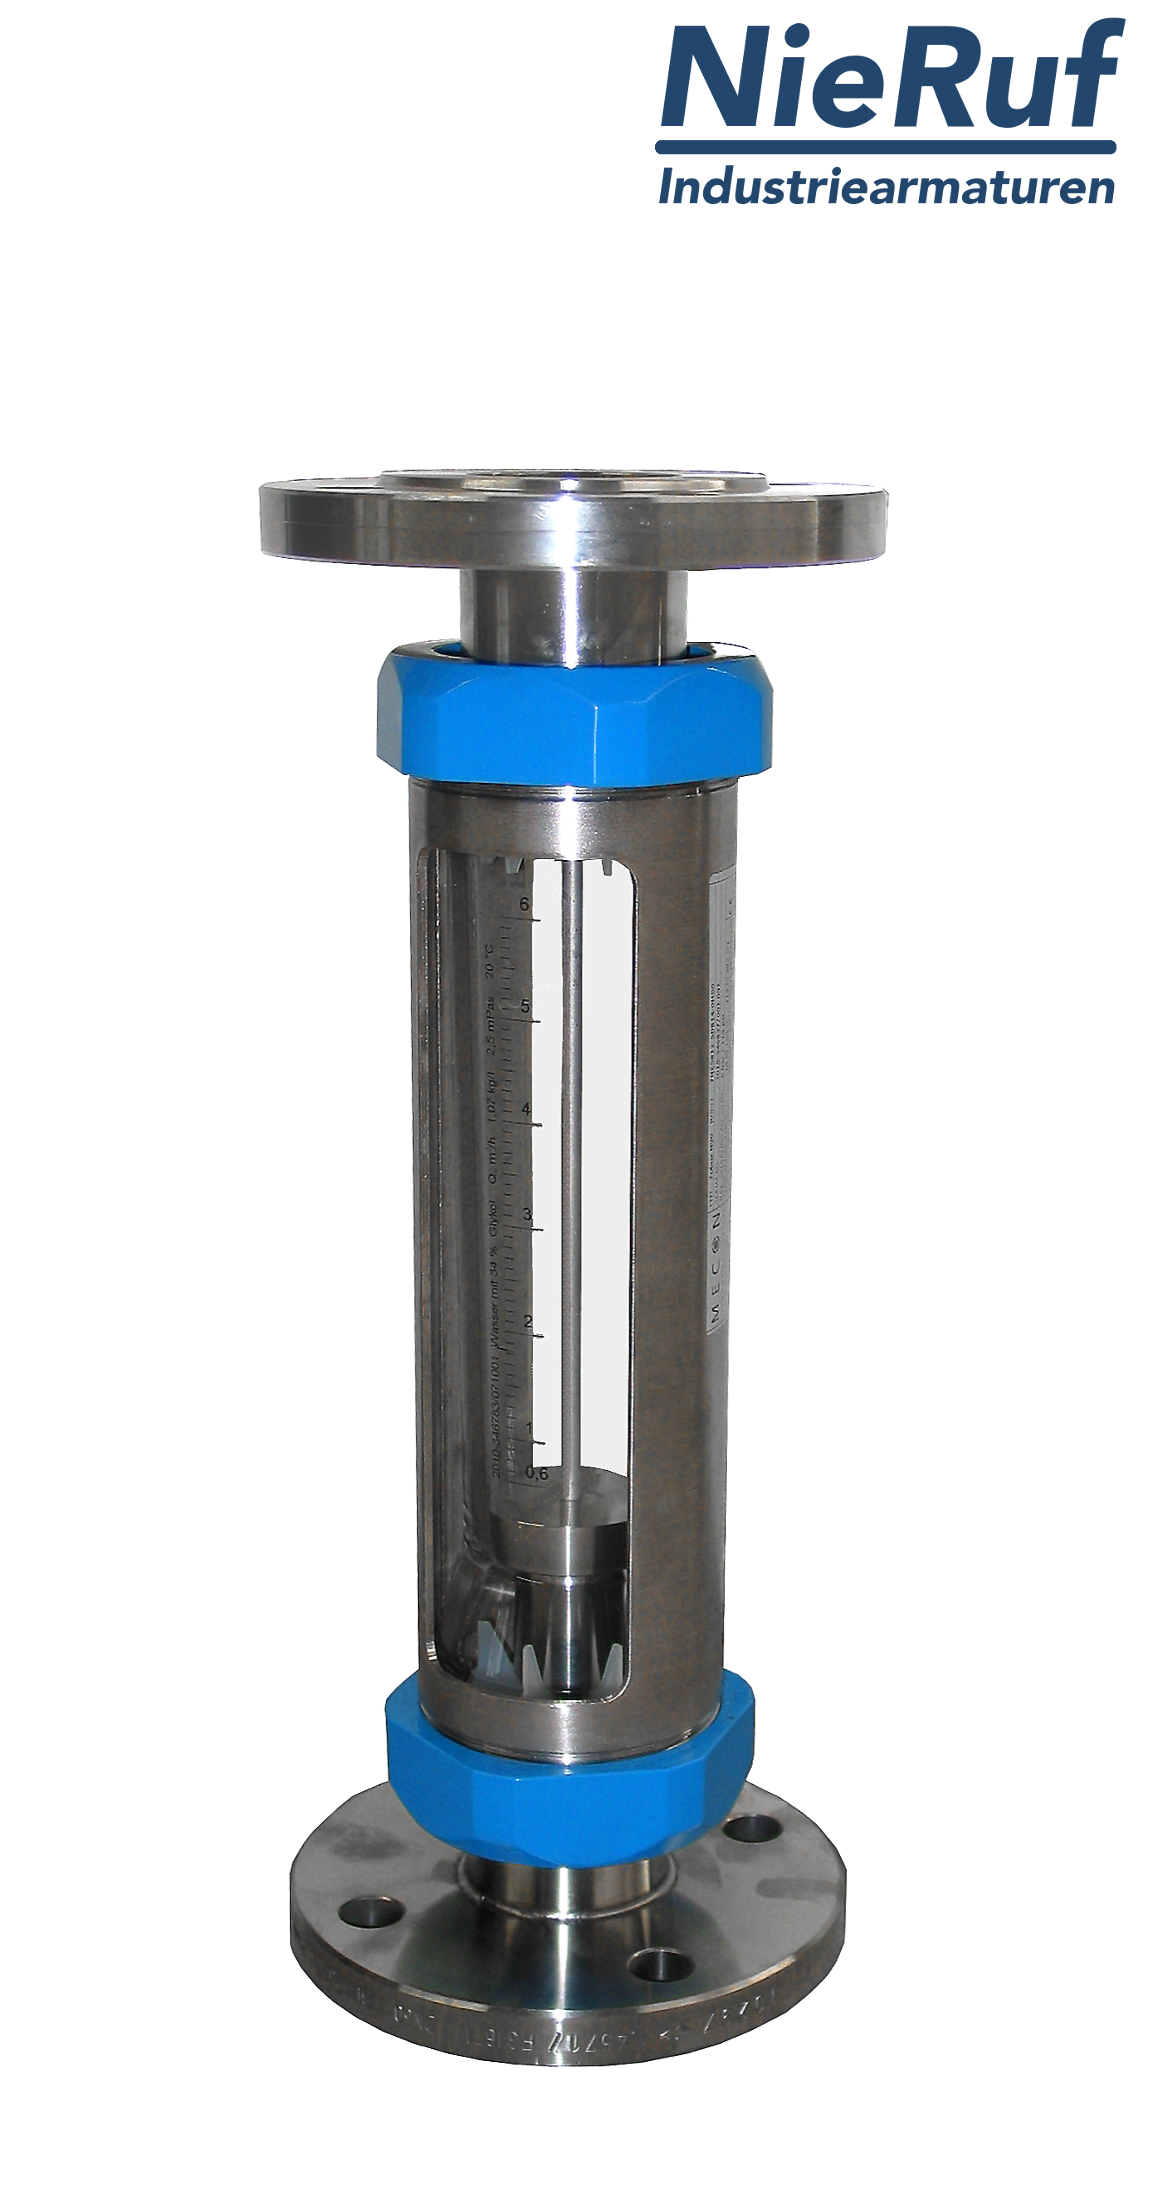 Variable area flowmeter stainless steel + borosilicate flange DN20 4.0 - 40.0 l/h water FKM